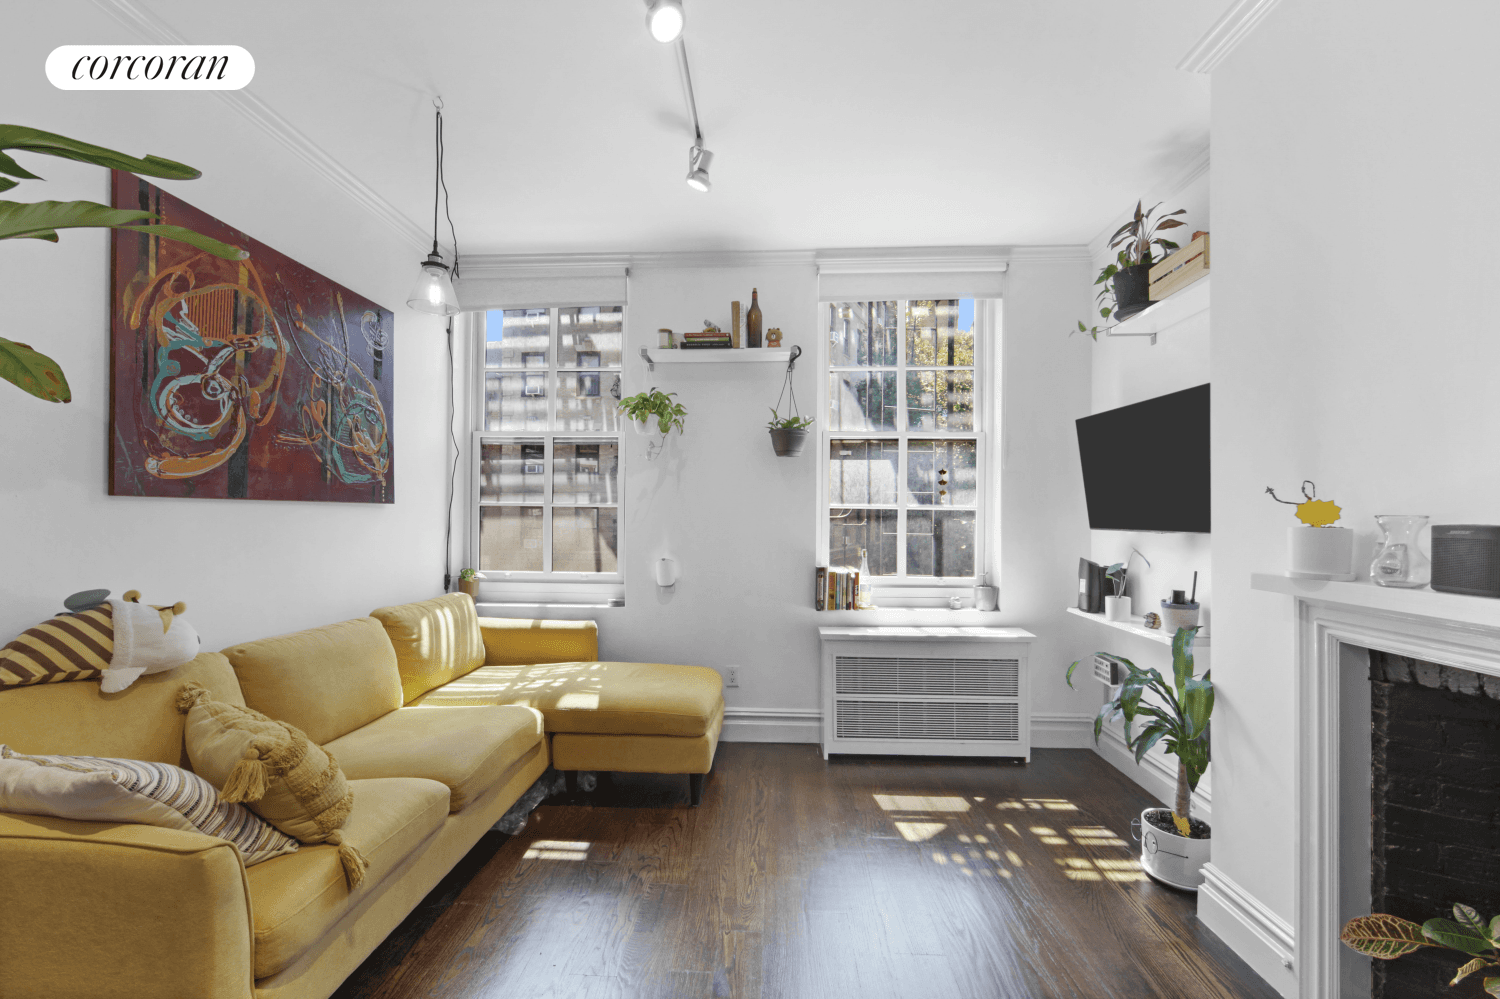 Updated One bedroom in Prime West Village locationApartment Features Natural light all day shining through gorgeous windows, western exposure Nice sized living space, including decorative fireplace Queen sized bedroom w ...